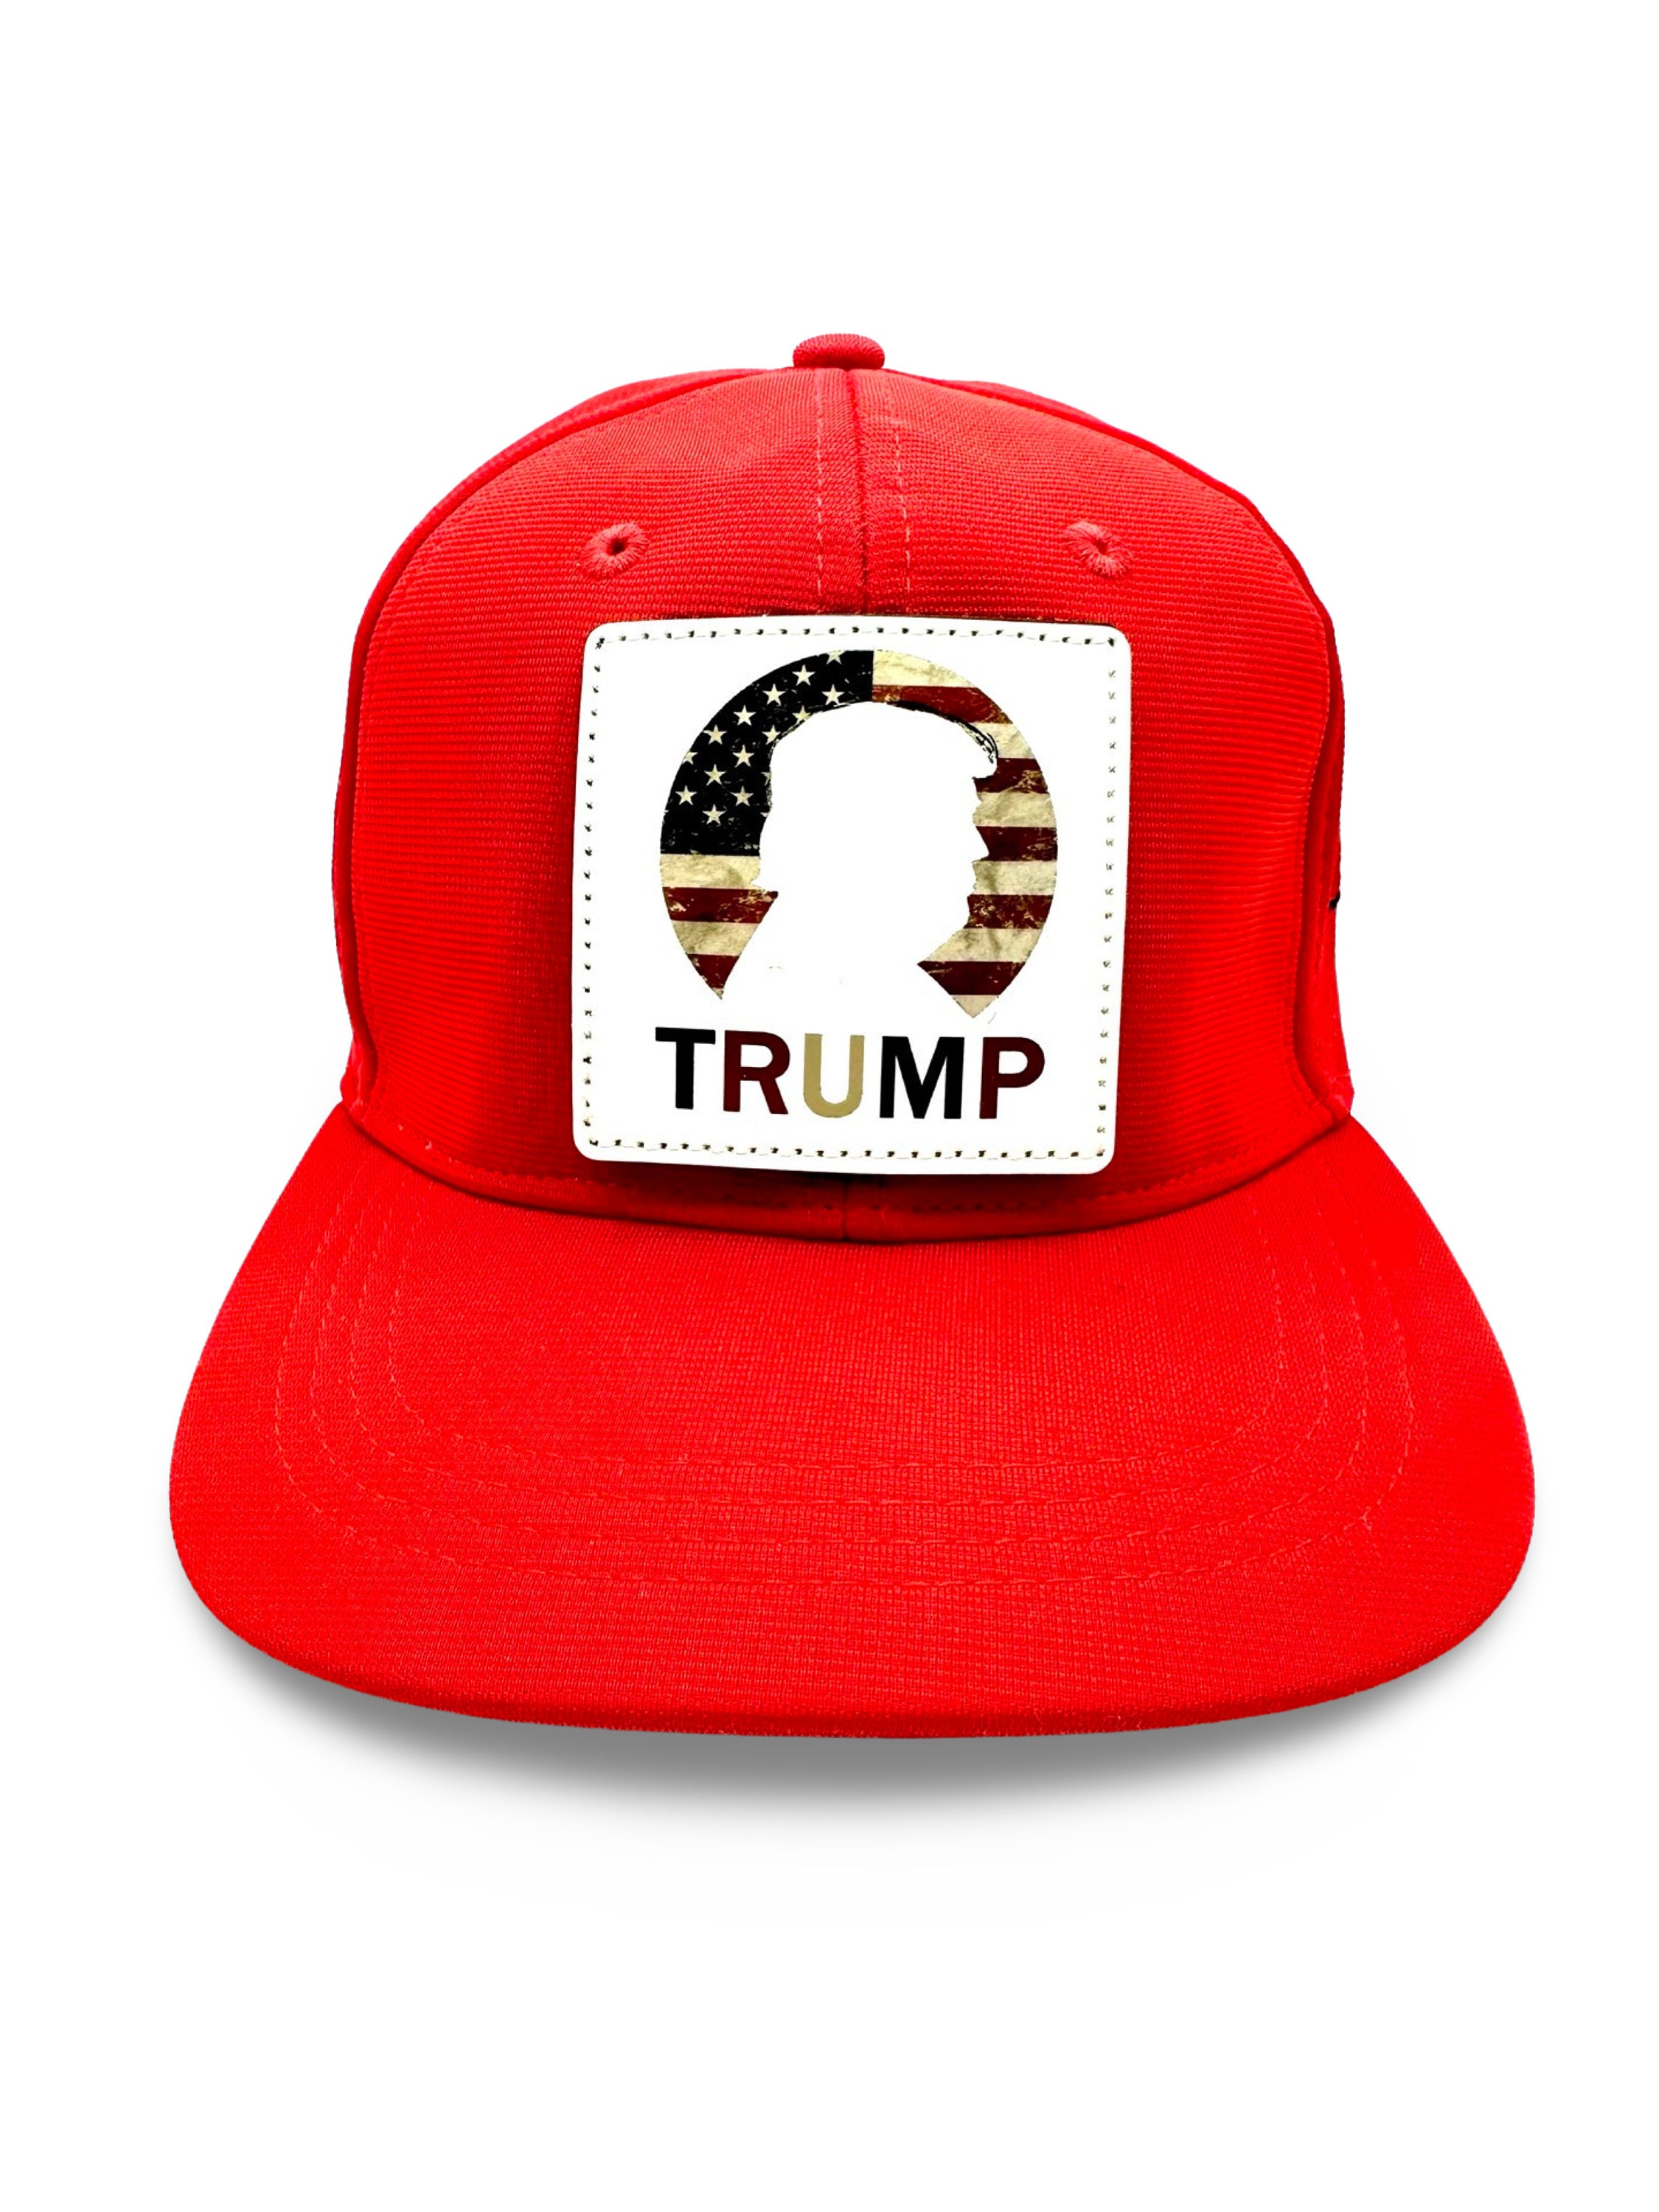 Trump Red Flex Fit Hat With Hook And Loop Velcro Style Removable Patch Hat  For Men And Women